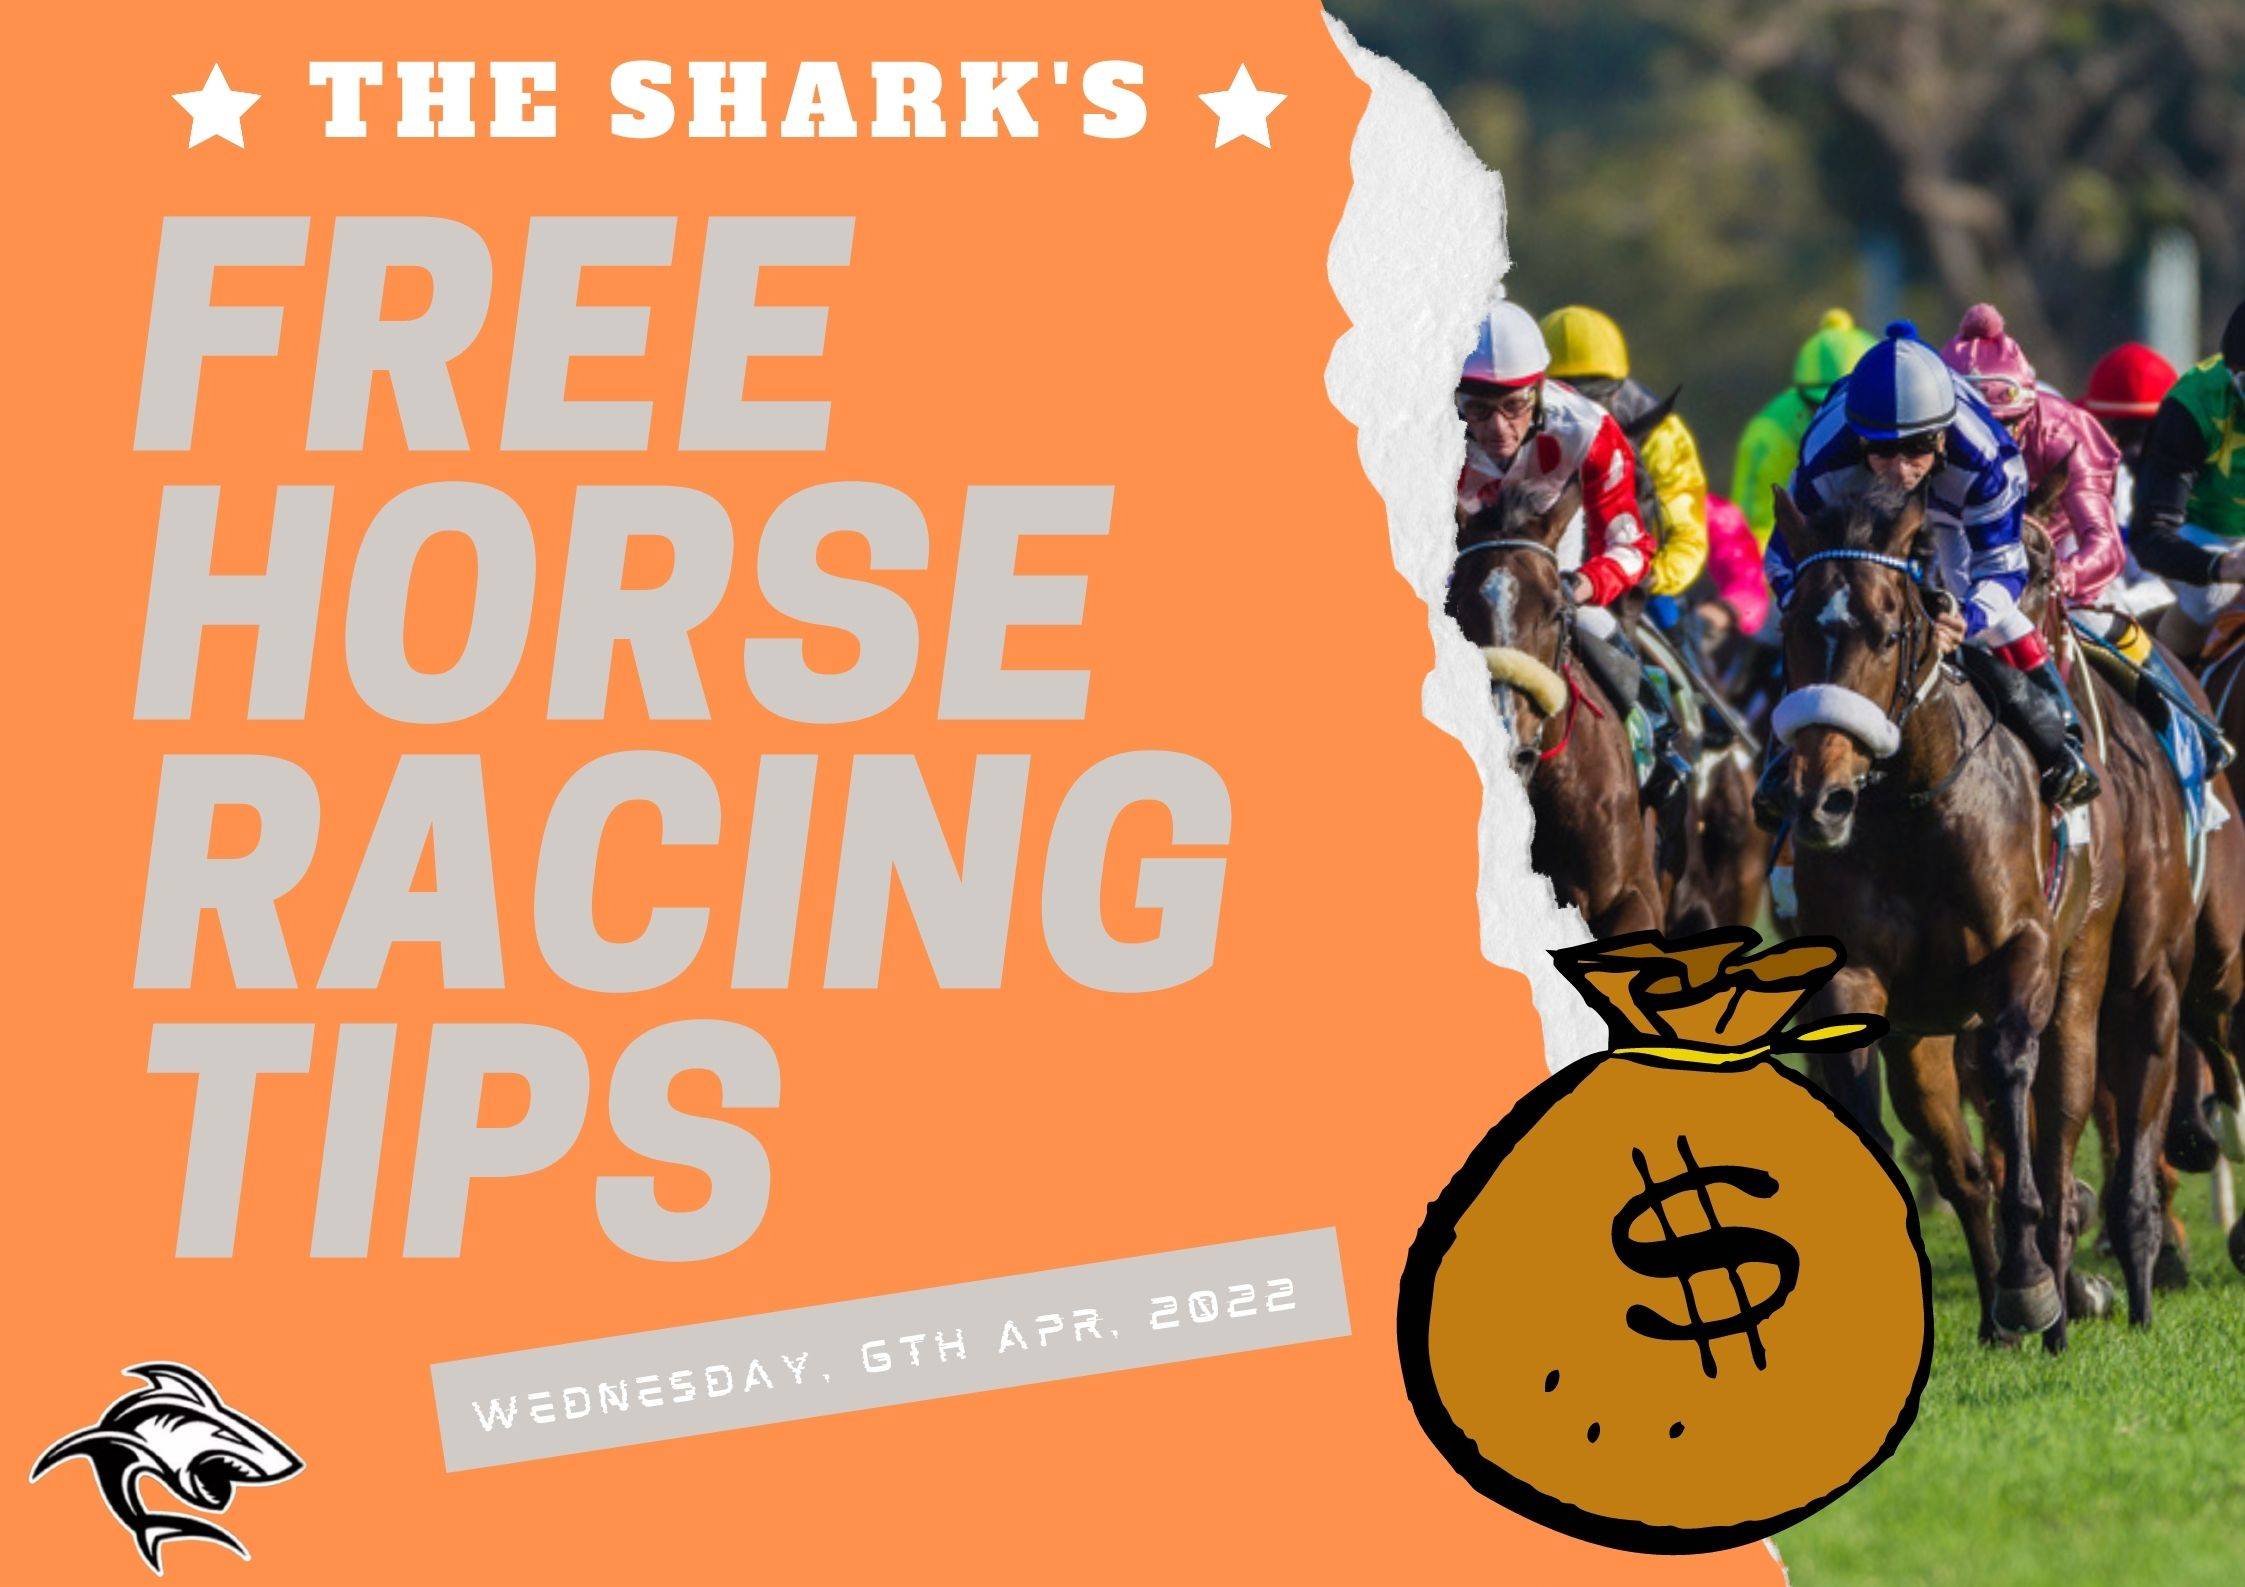 Free Horse Racing Tips - 6th Apr